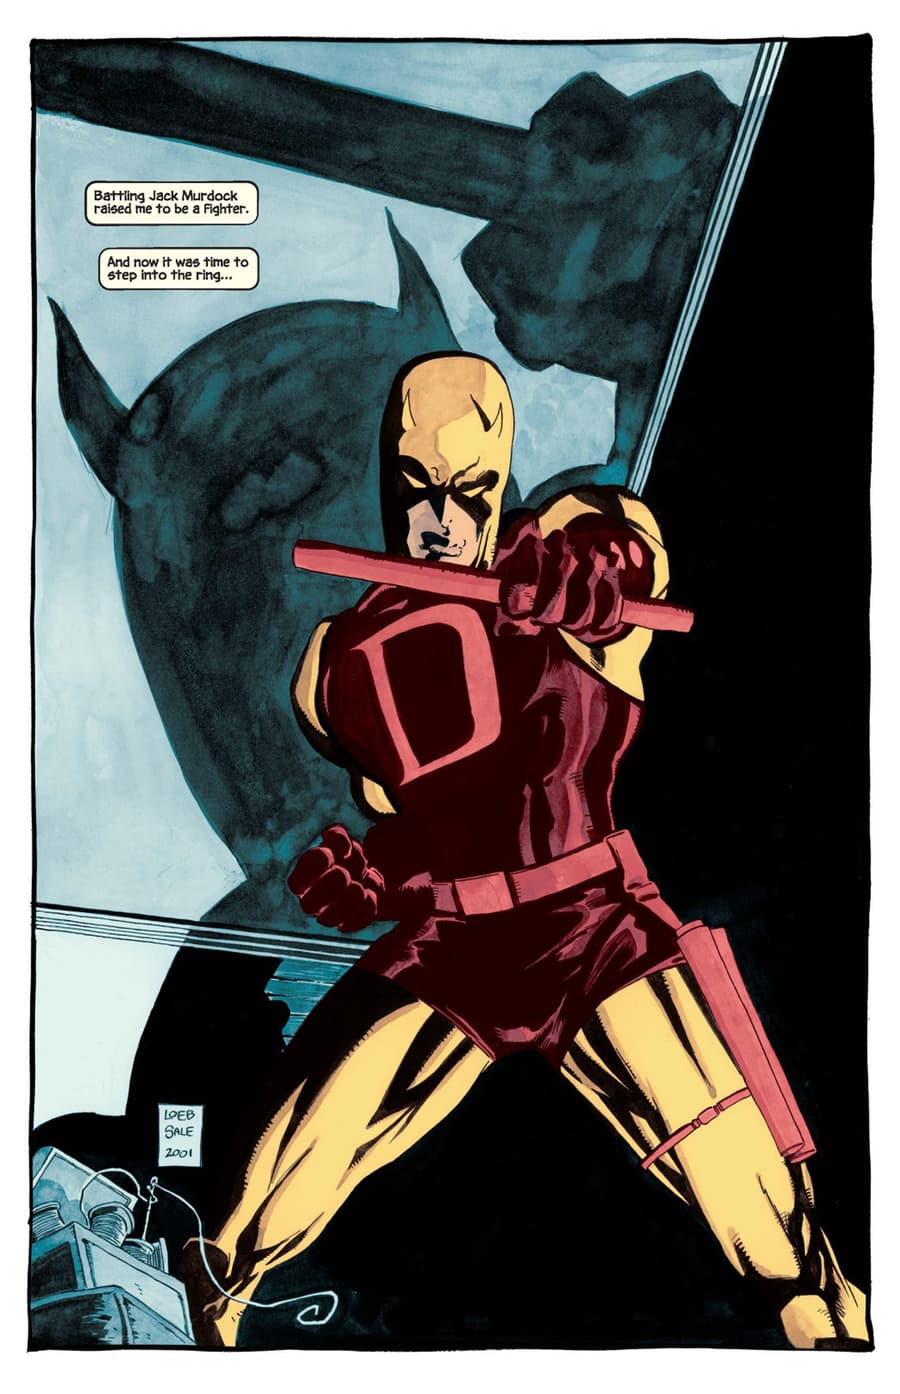 DAREDEVIL: YELLOW (2001) #1 page by Jeph Loeb and Tim Sale